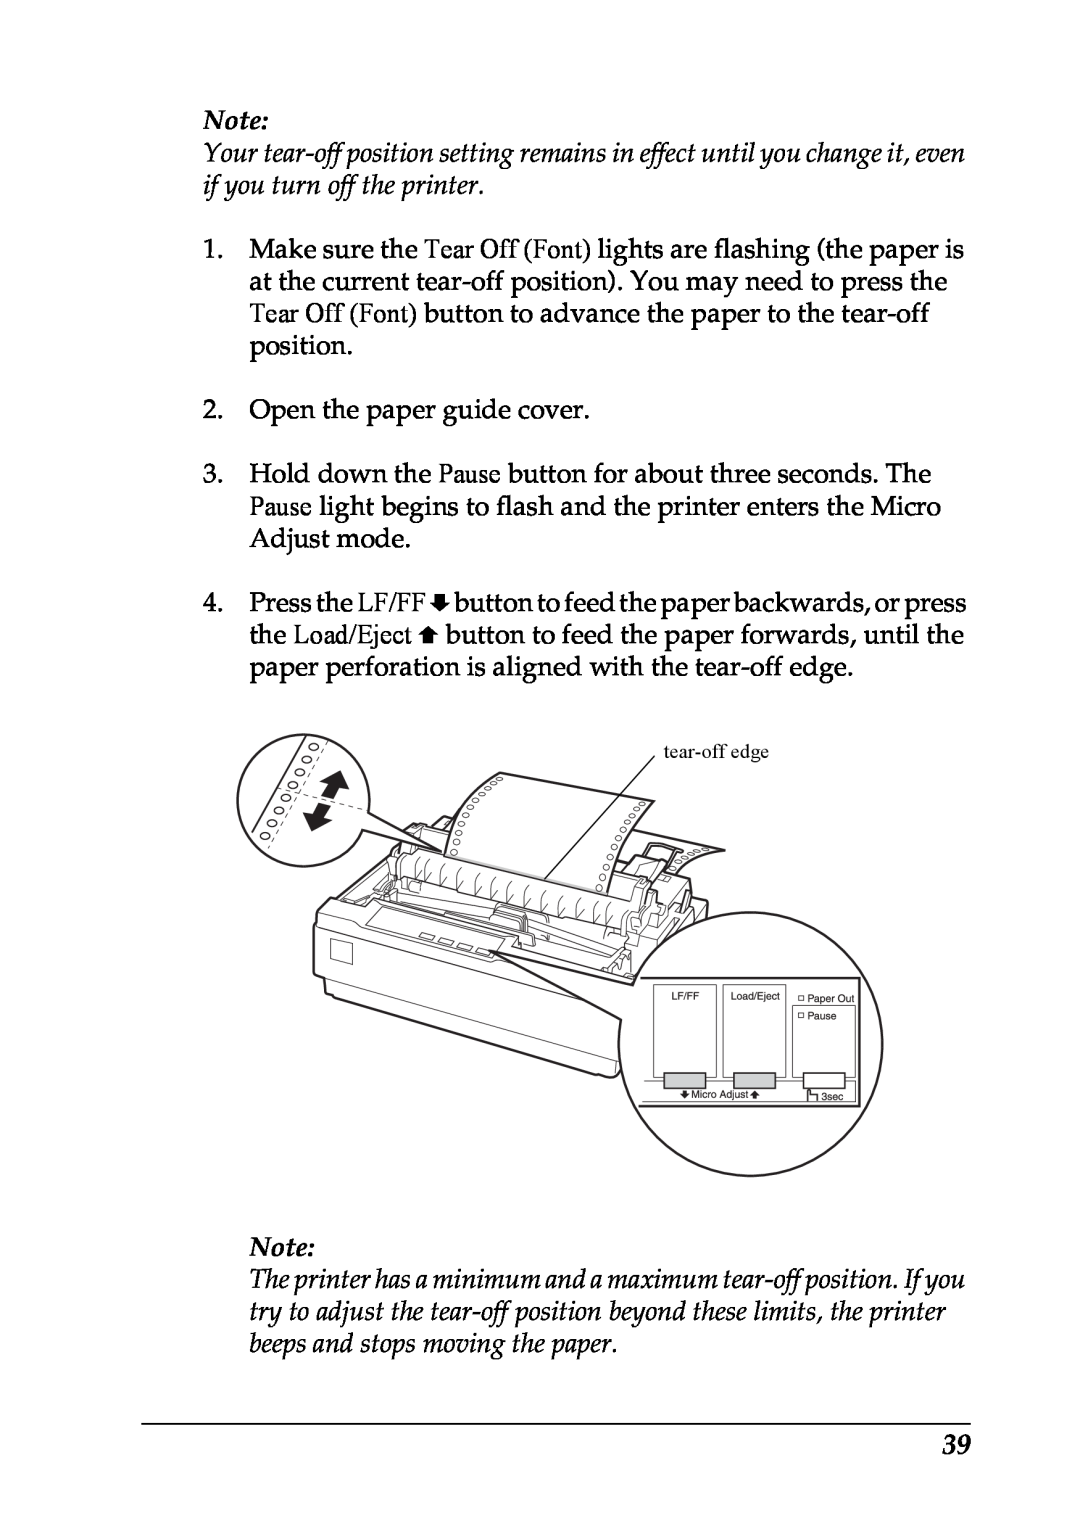 Epson LX-1170 manual Make sure the Tear Off Font lights are flashing the paper is 